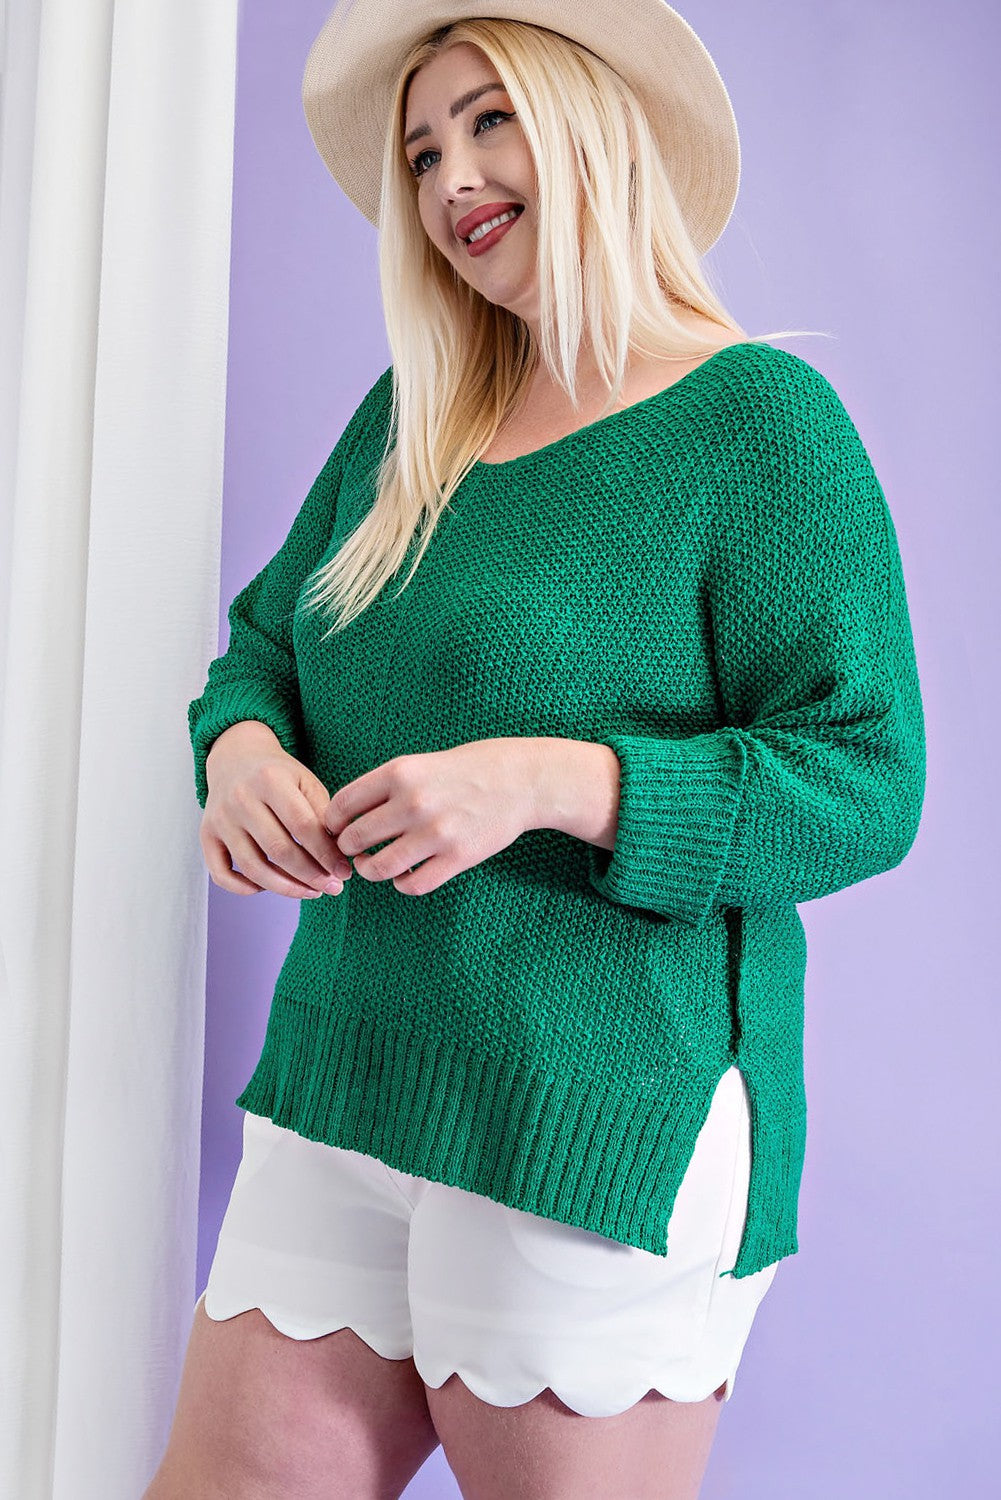 Plus Sized Crew Neck Knit Sweater (Solids)